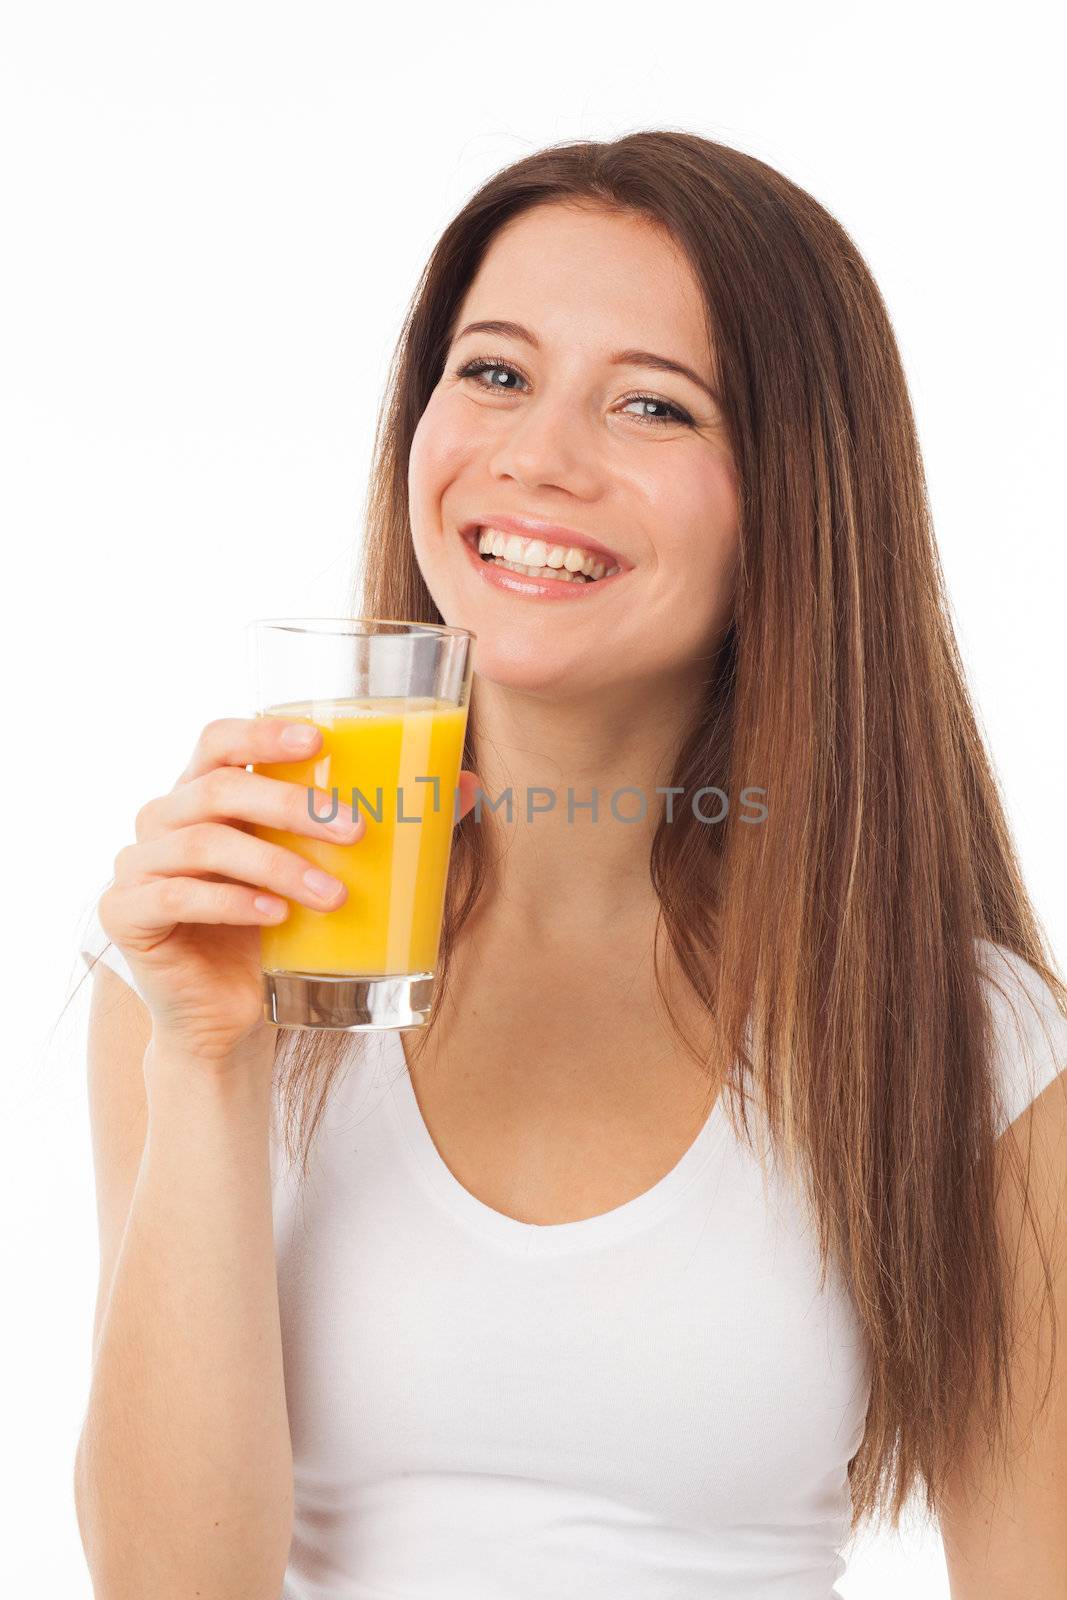 Pretty young woman with a glass of orange juice, isolated on white